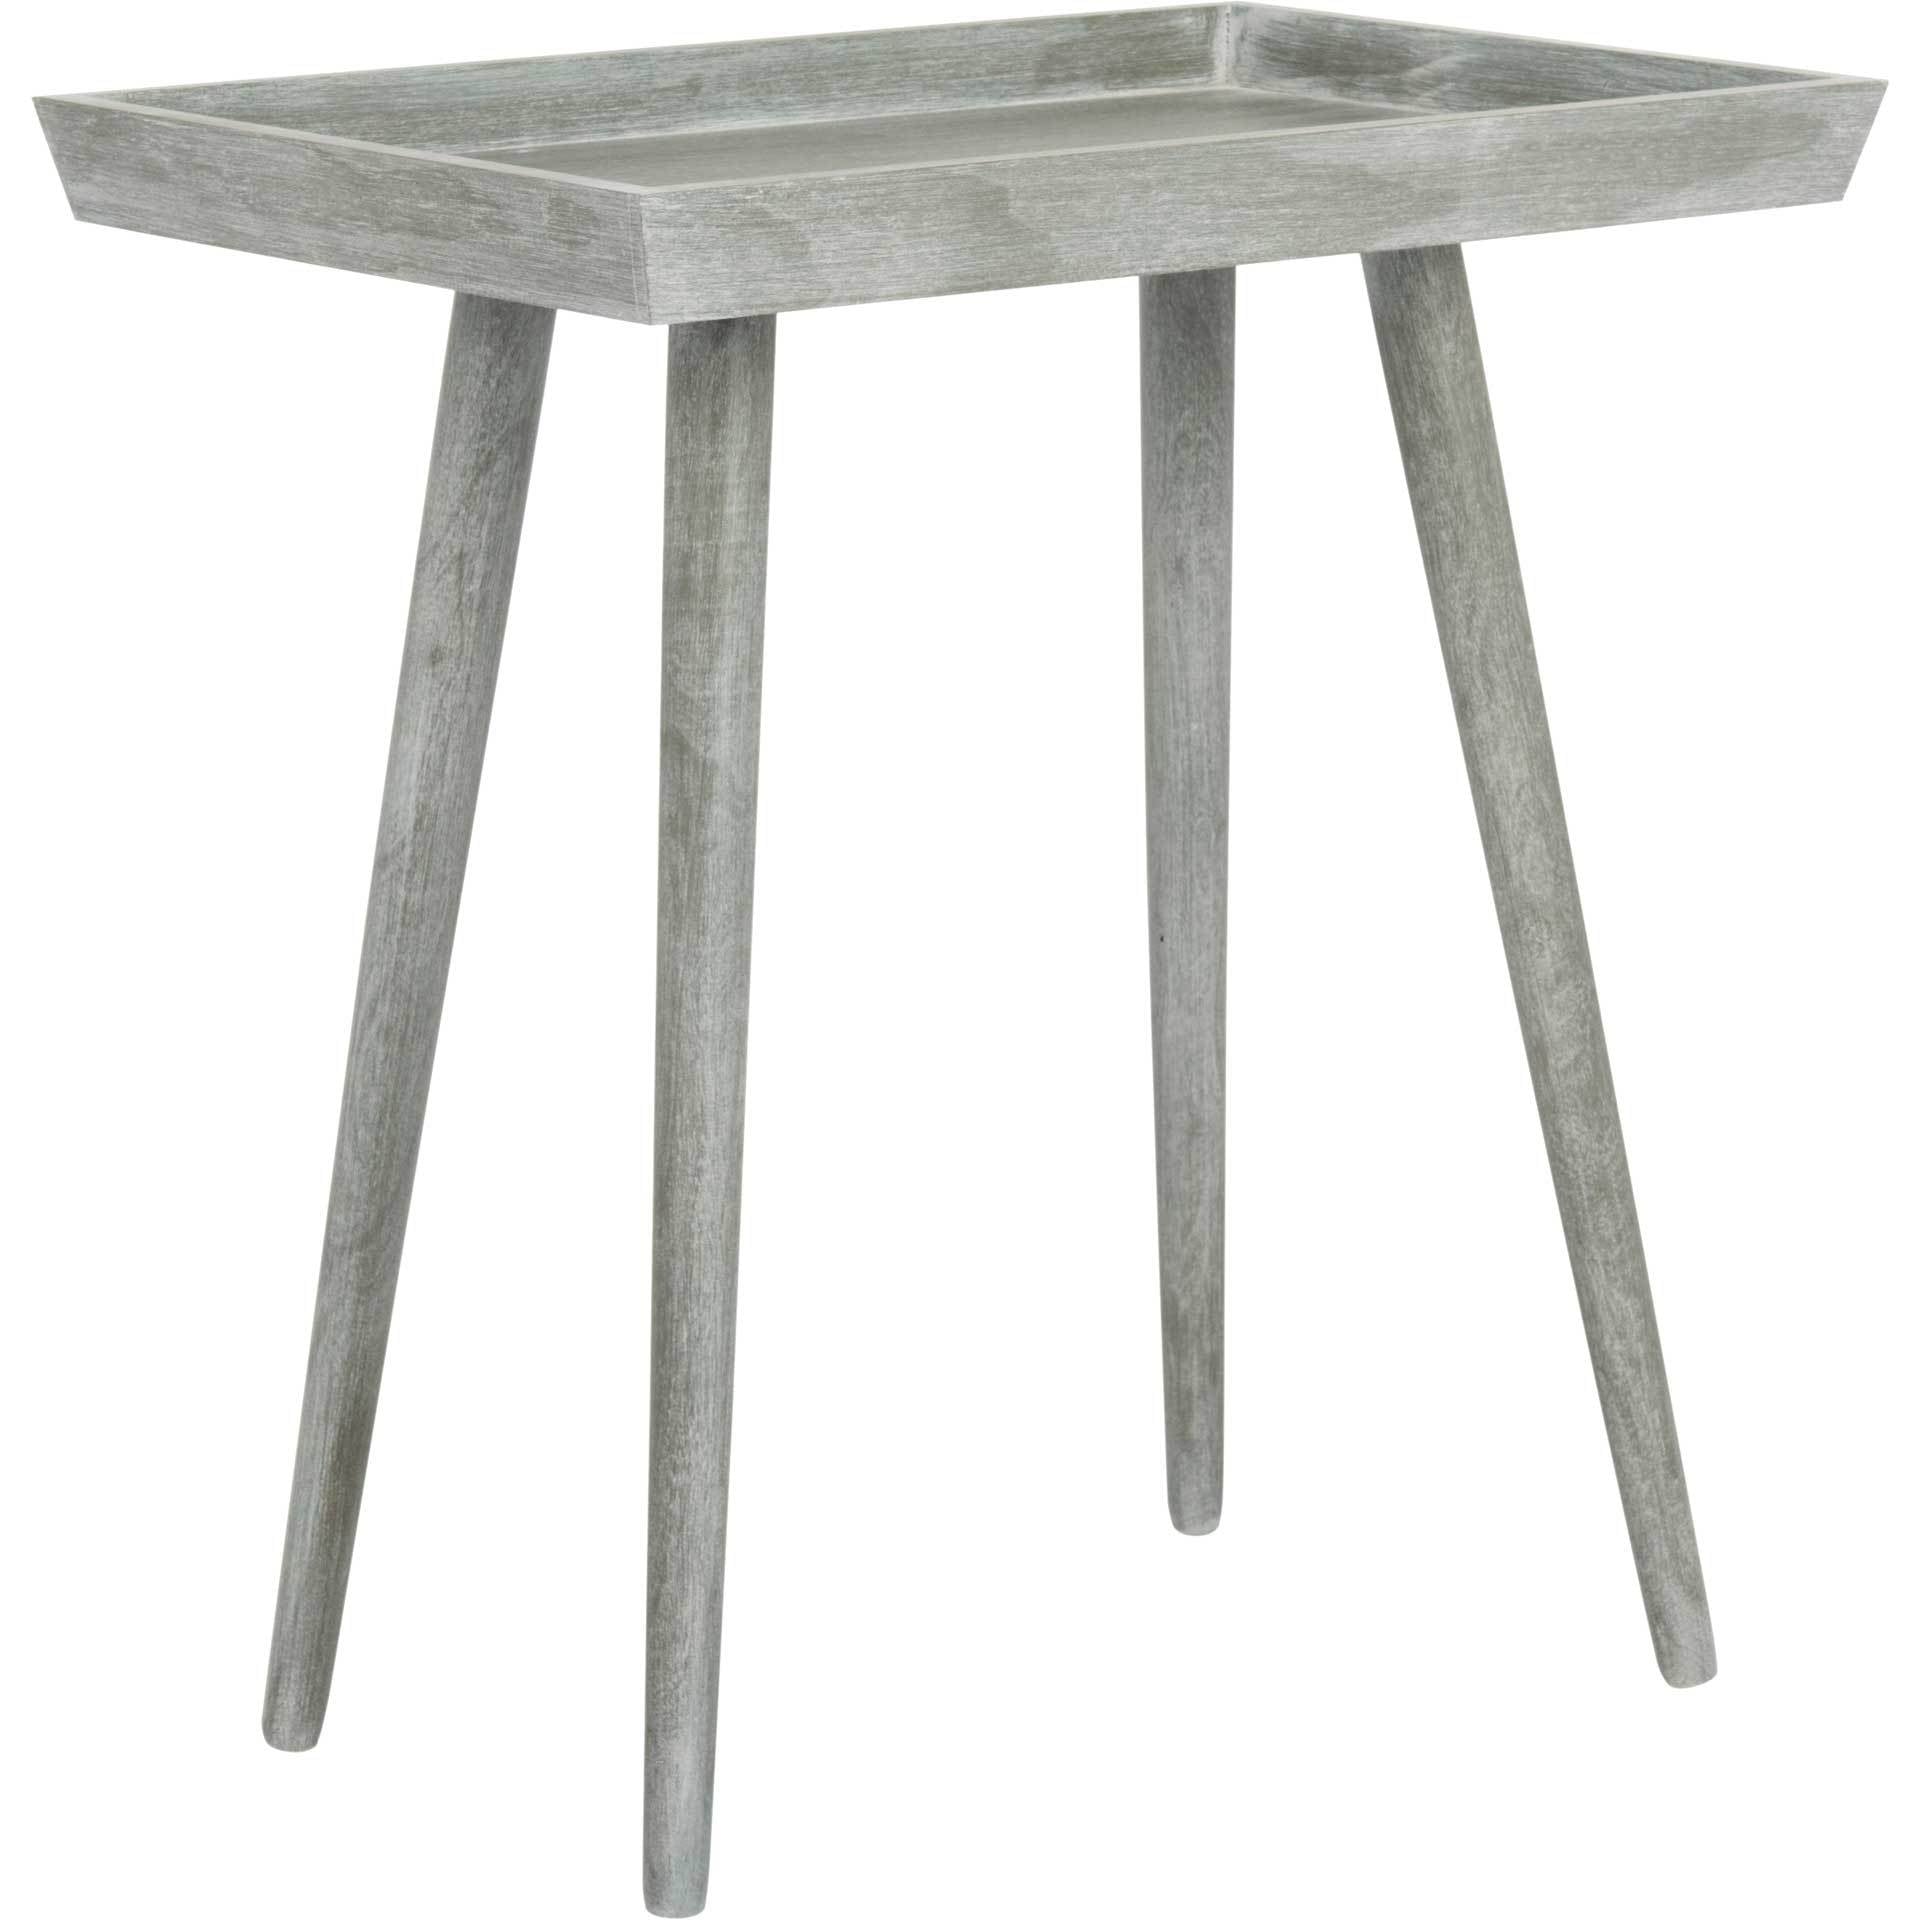 Norah Tray Accent Table Slate Gray